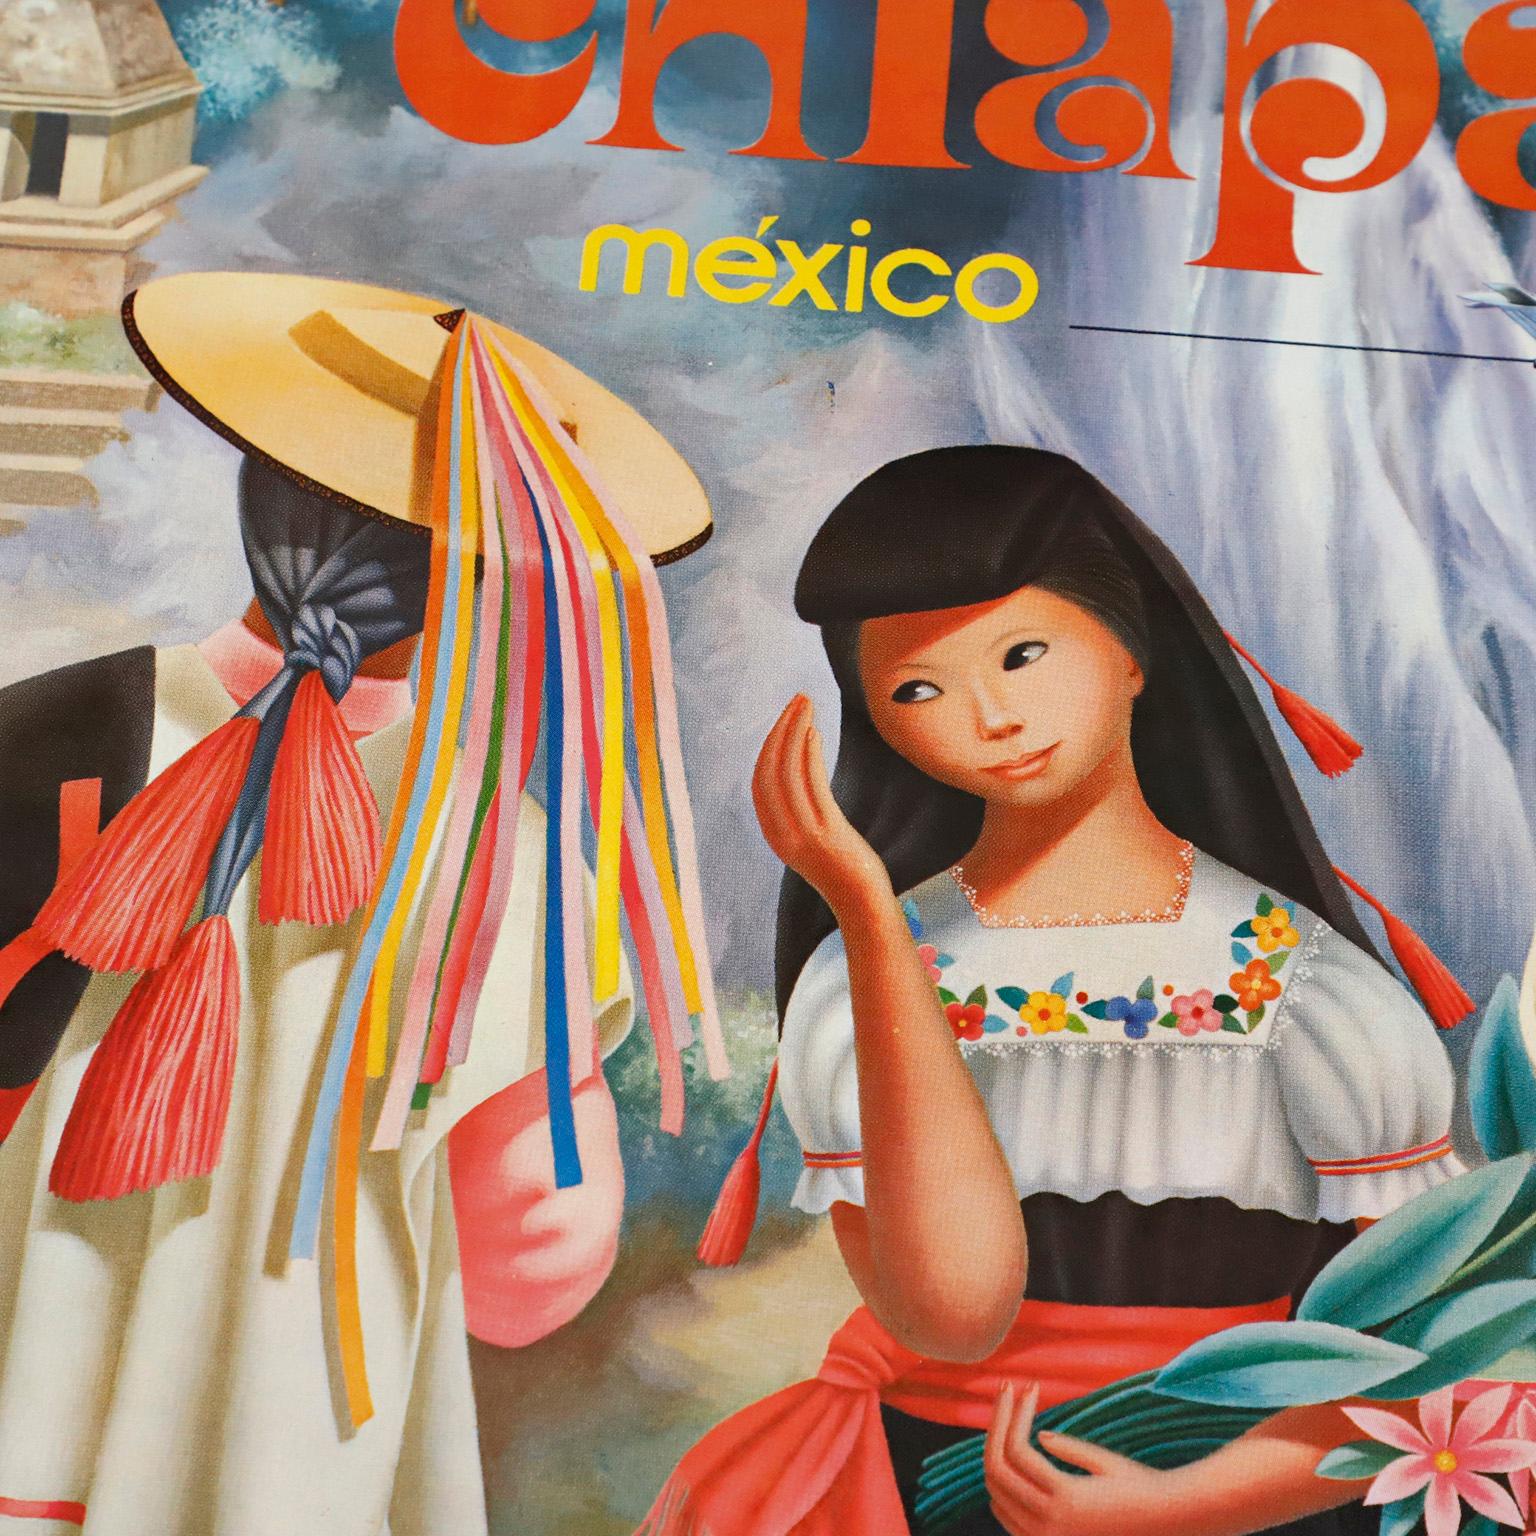 circa 1970. We offer this Original Chiapas, Mexicana Airlines Poster by Regina Raull.

Regina Raull was a Spanish painter with residence in Mexico City. A native of Bilbao, Raull emigrated from Spain with her family in 1939, arriving in Mexico in